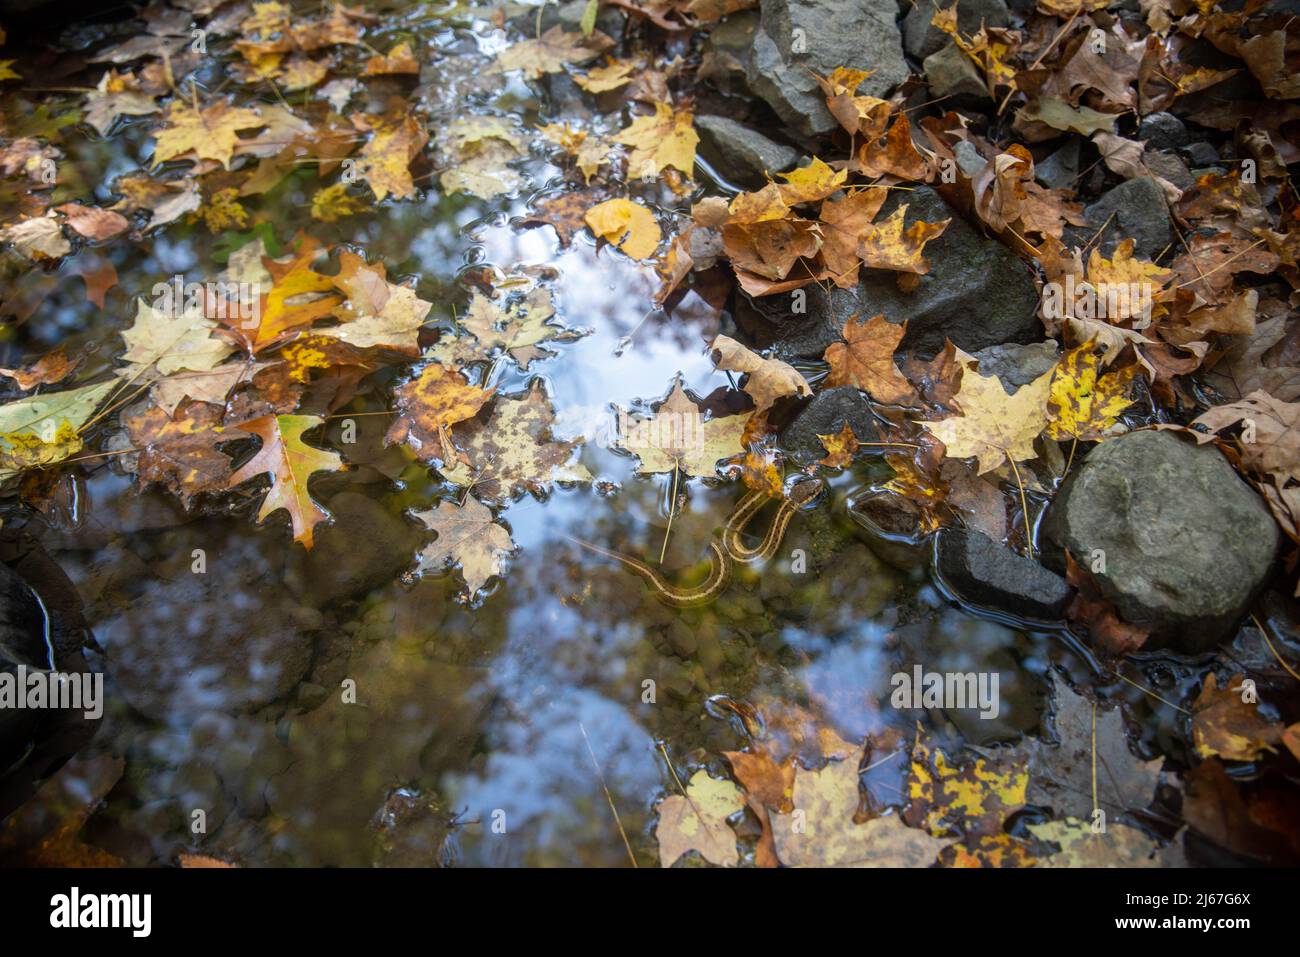 Pennsylvania garter snake thamnophis sirtalis in a beautiful autumn forest stream with bright yellow leaves. Its head sticks out if the water. Beautif Stock Photo